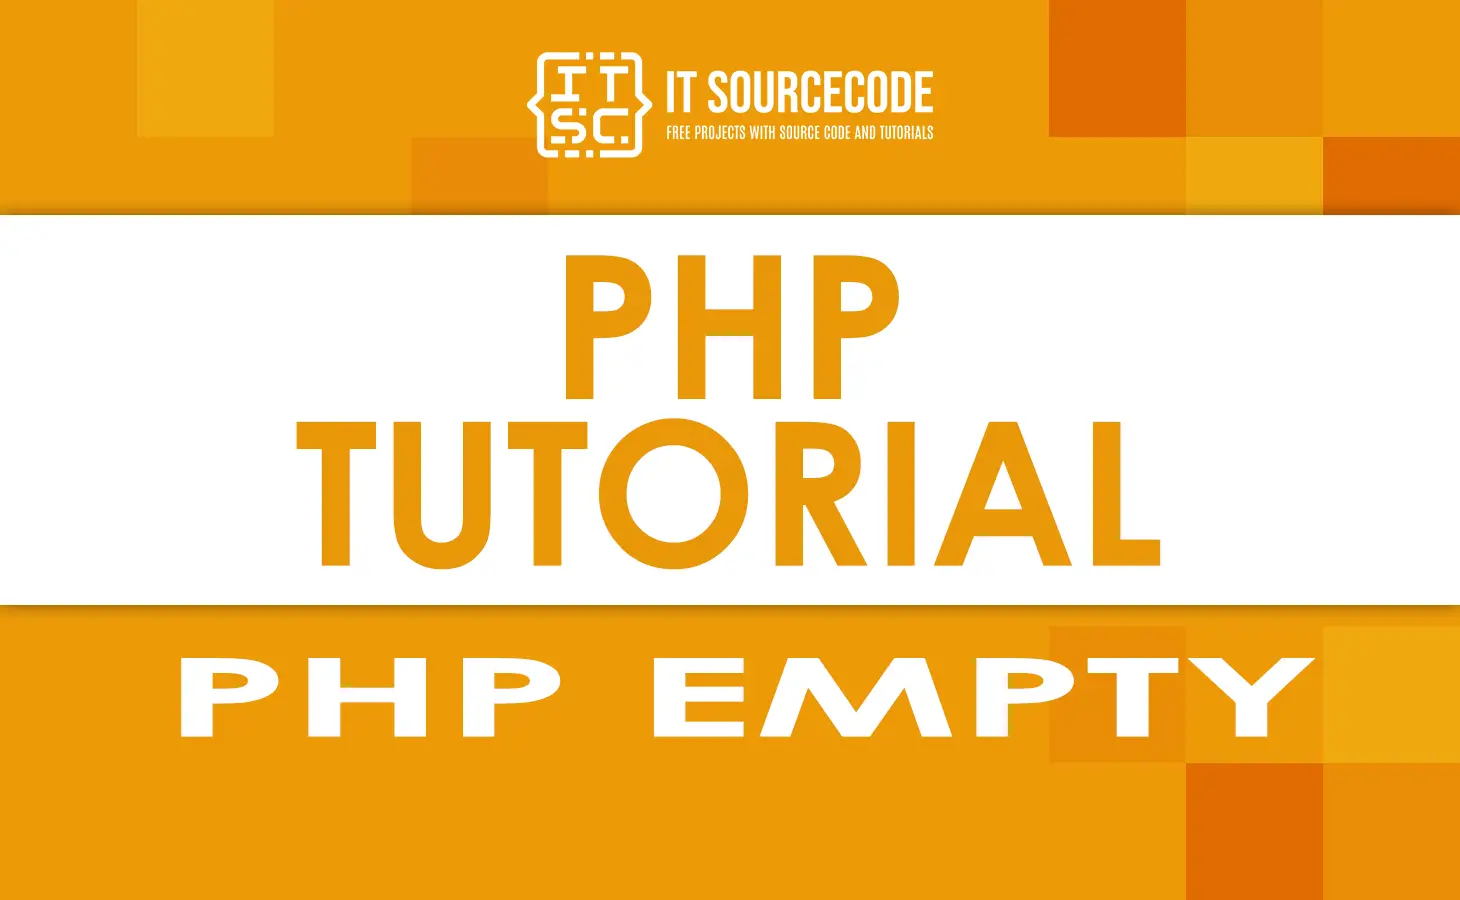 PHP Empty Function